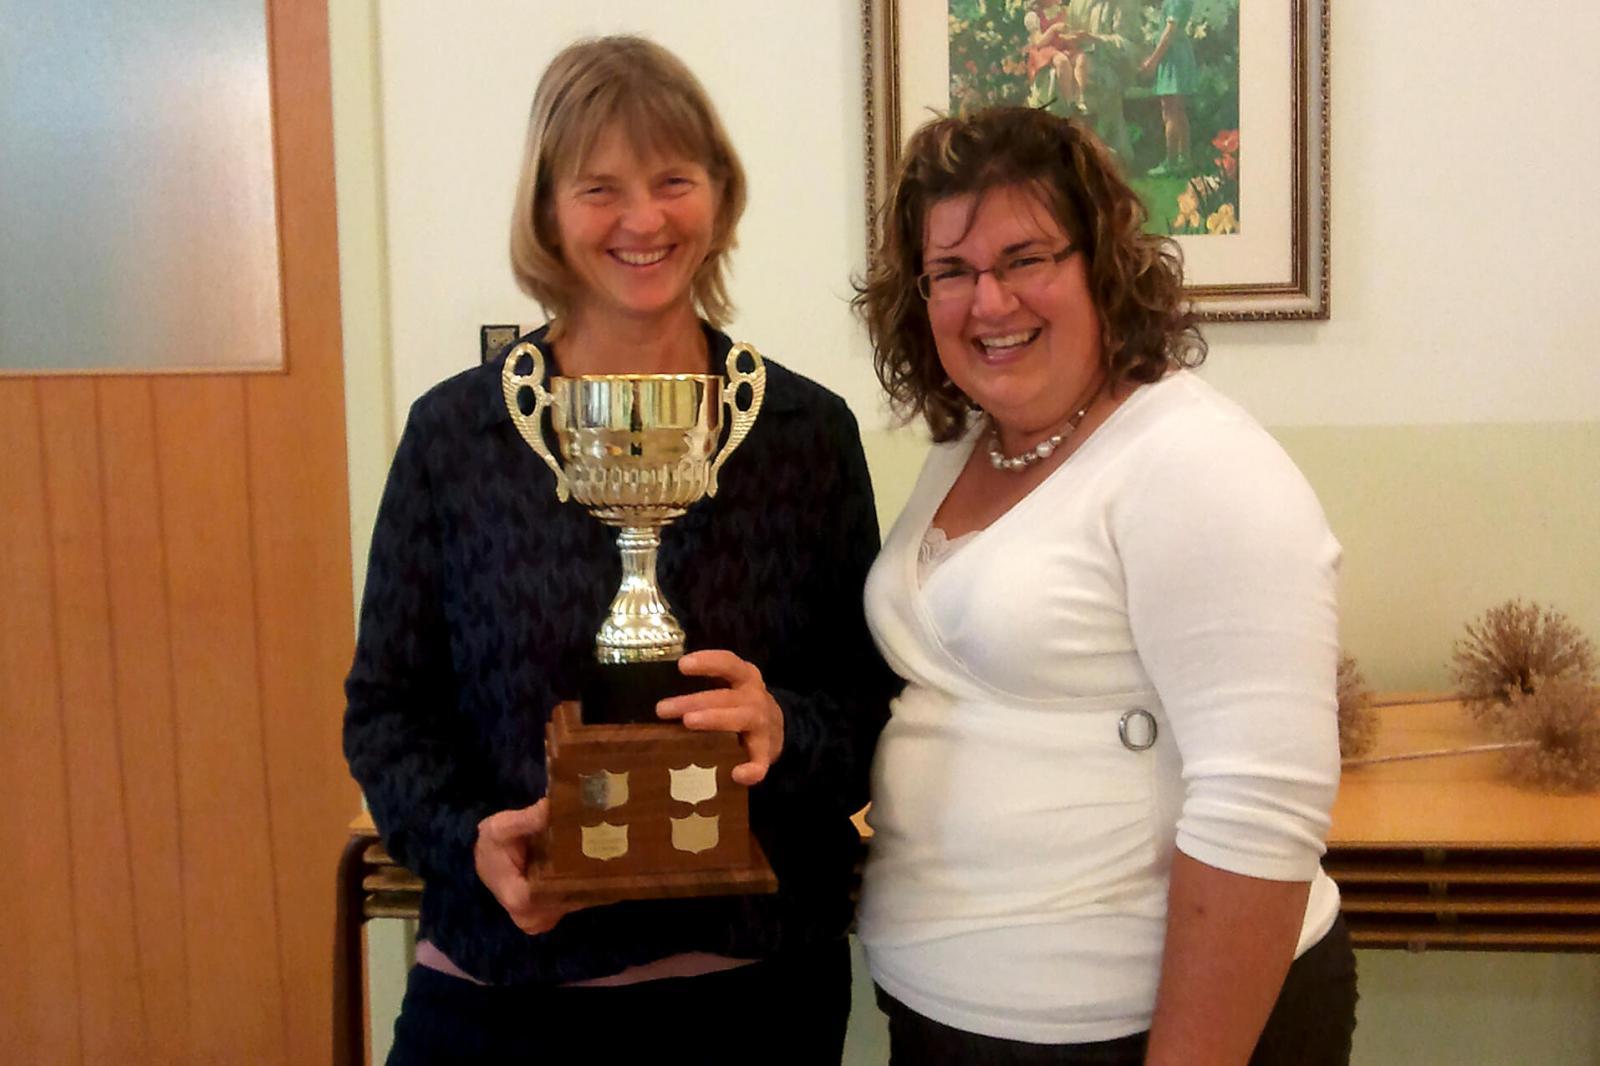 Bonita Glover of The Garden Network, left, accepts the Commercial Beautification Trophy from Lisa Smith of Lisa Purves Garden Design and Consultation, a member of Upper Canada Chapter board of directors.